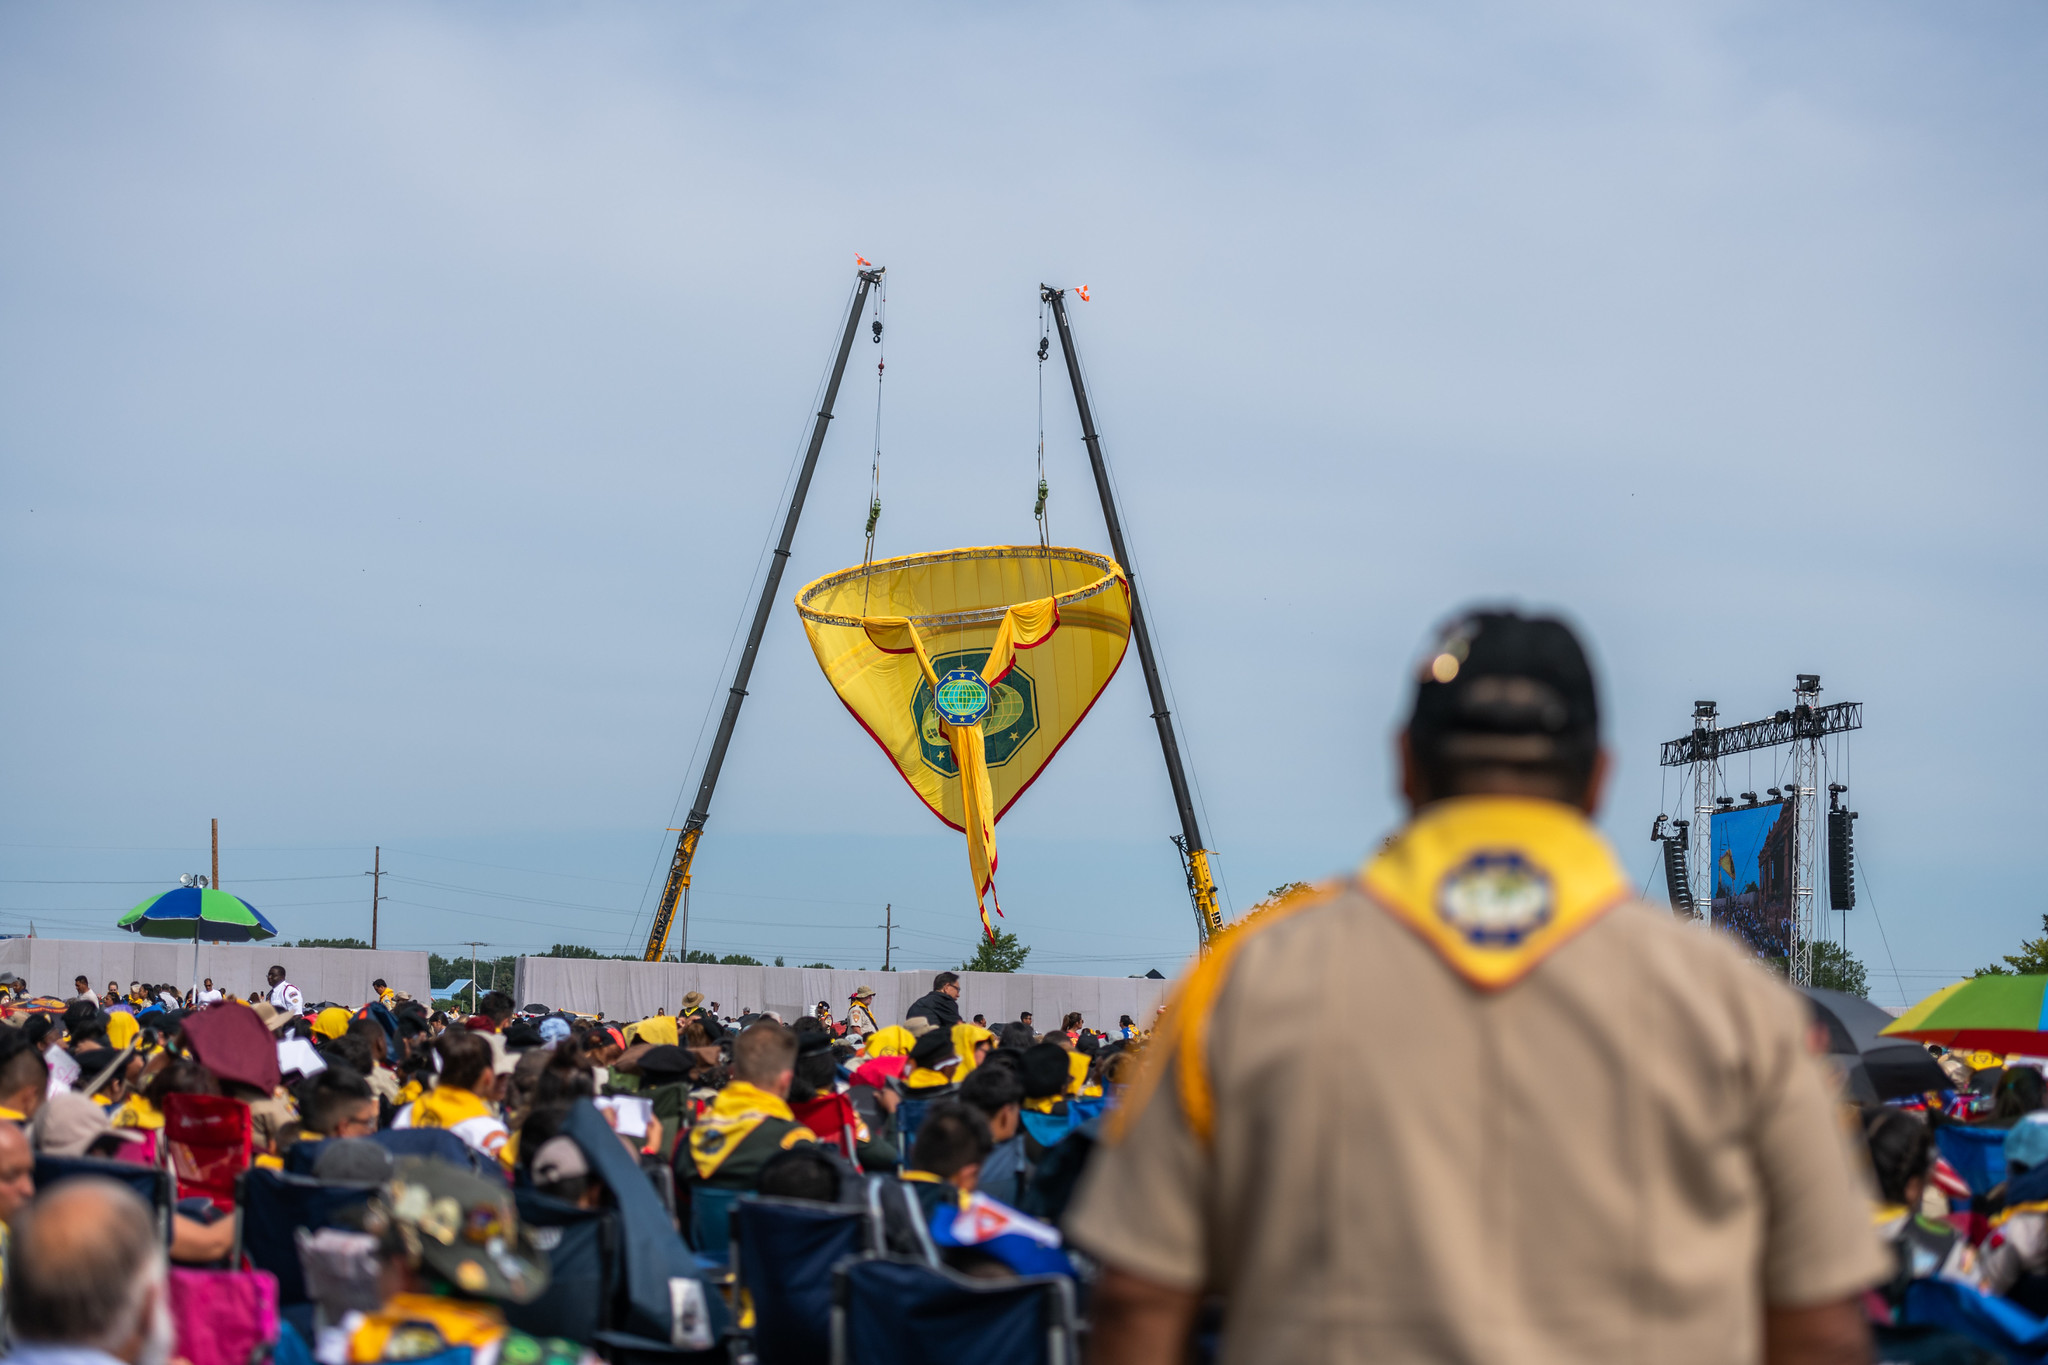 A Pathfinder leader pauses to watch the Guinness World Record Pathfinder Scarf being raised high in the Oshkosh, WI sky at The Chosen International Pathfinder Camporee 2019.